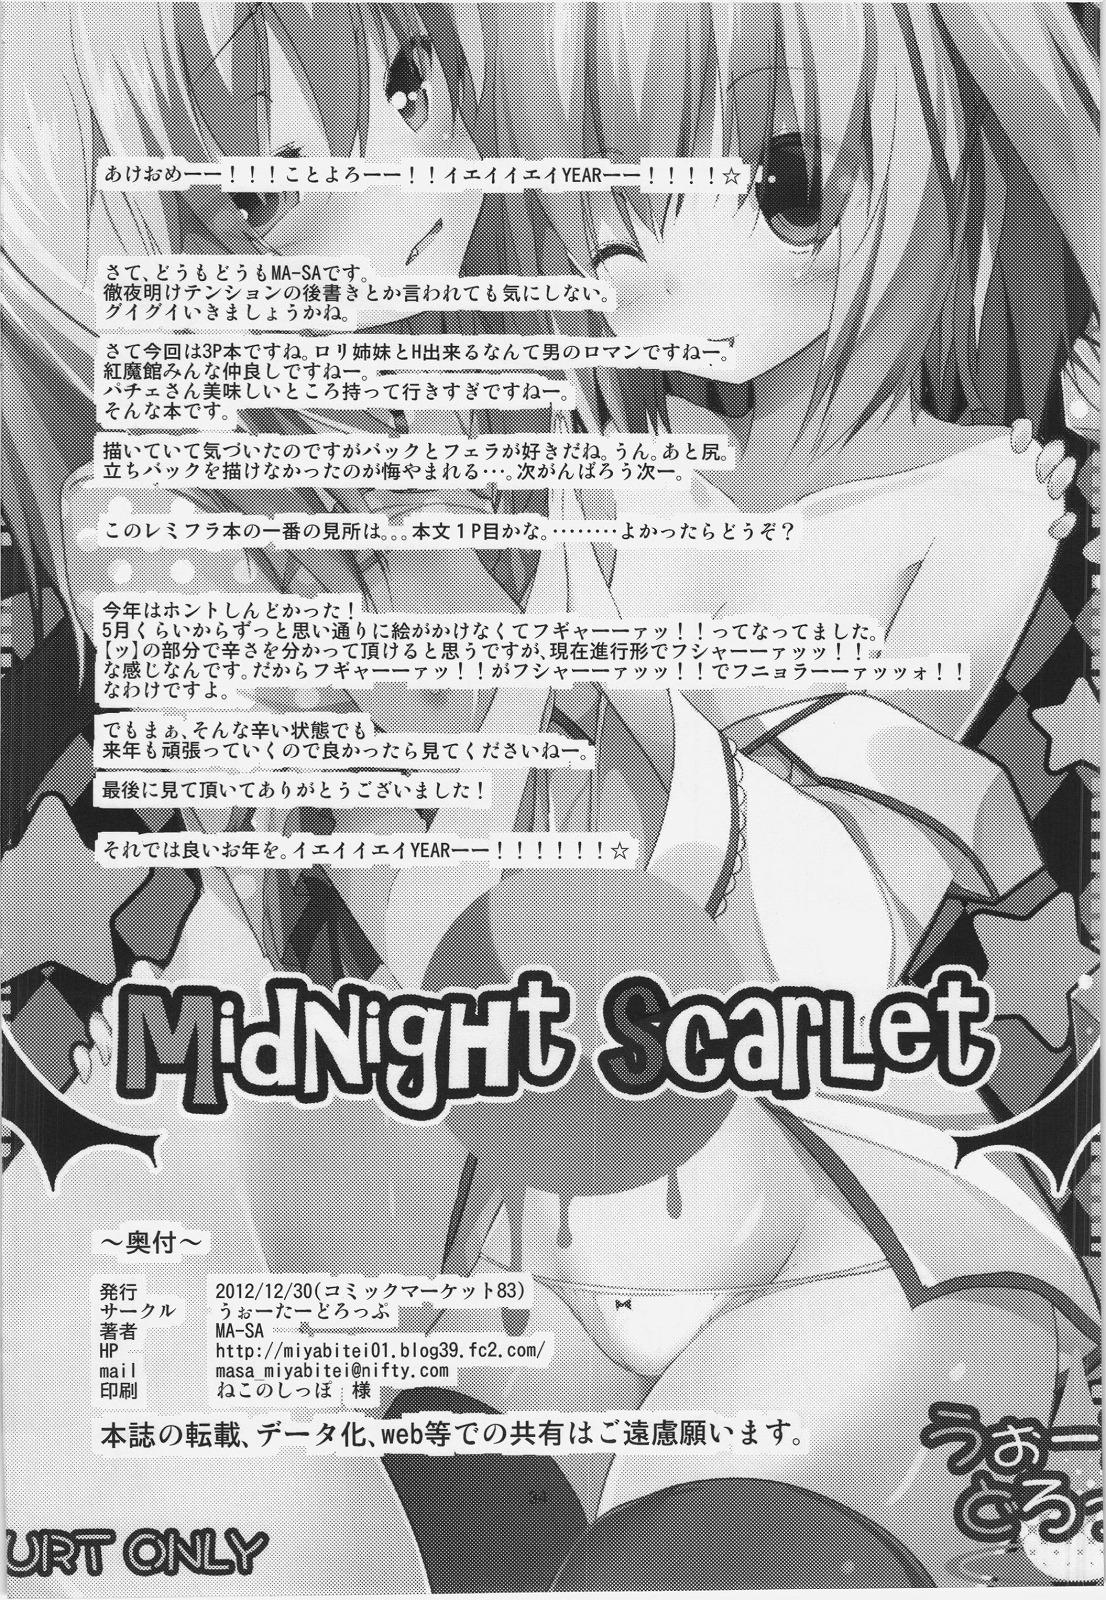 Best Blowjob Ever Midnight Scarlet - Touhou project Free Fuck - Page 34